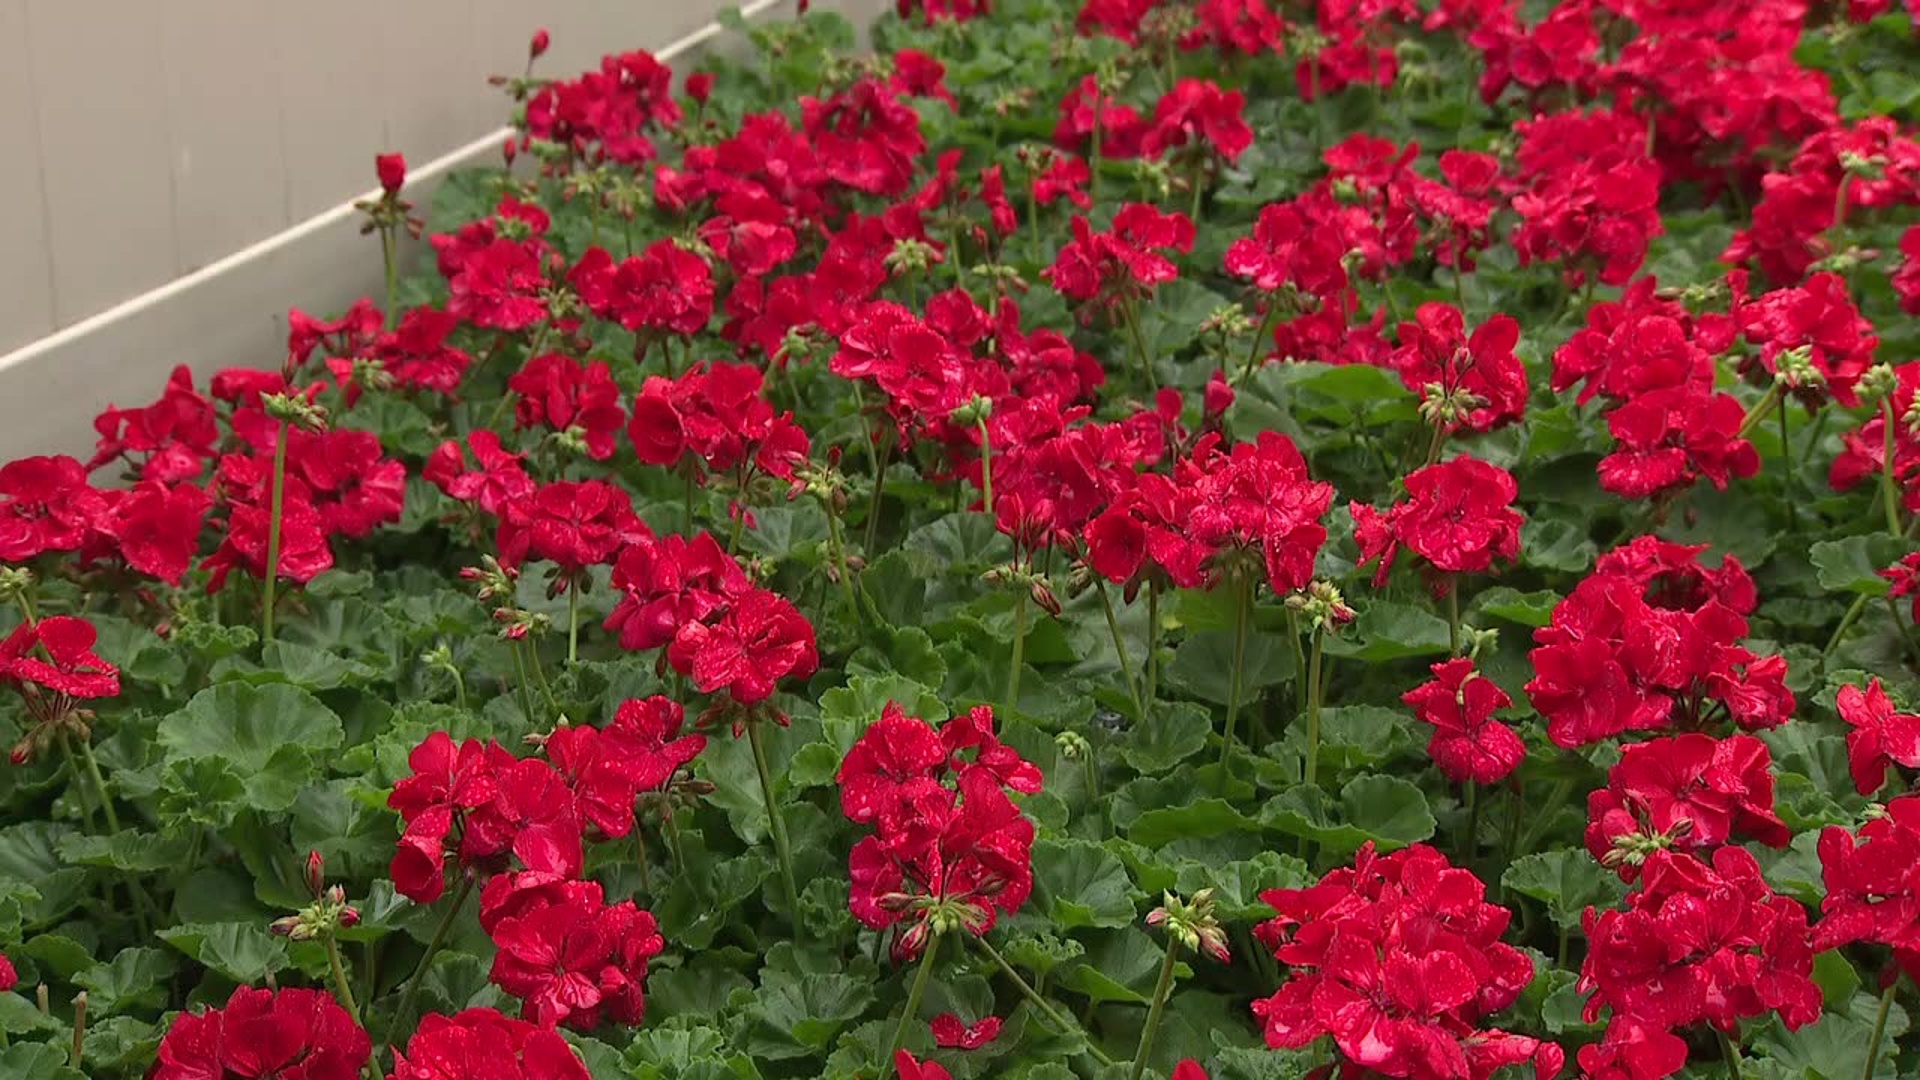 Newswatch 16's Emily Kress explains how a flower sale is helping the mission of Safe Monroe.